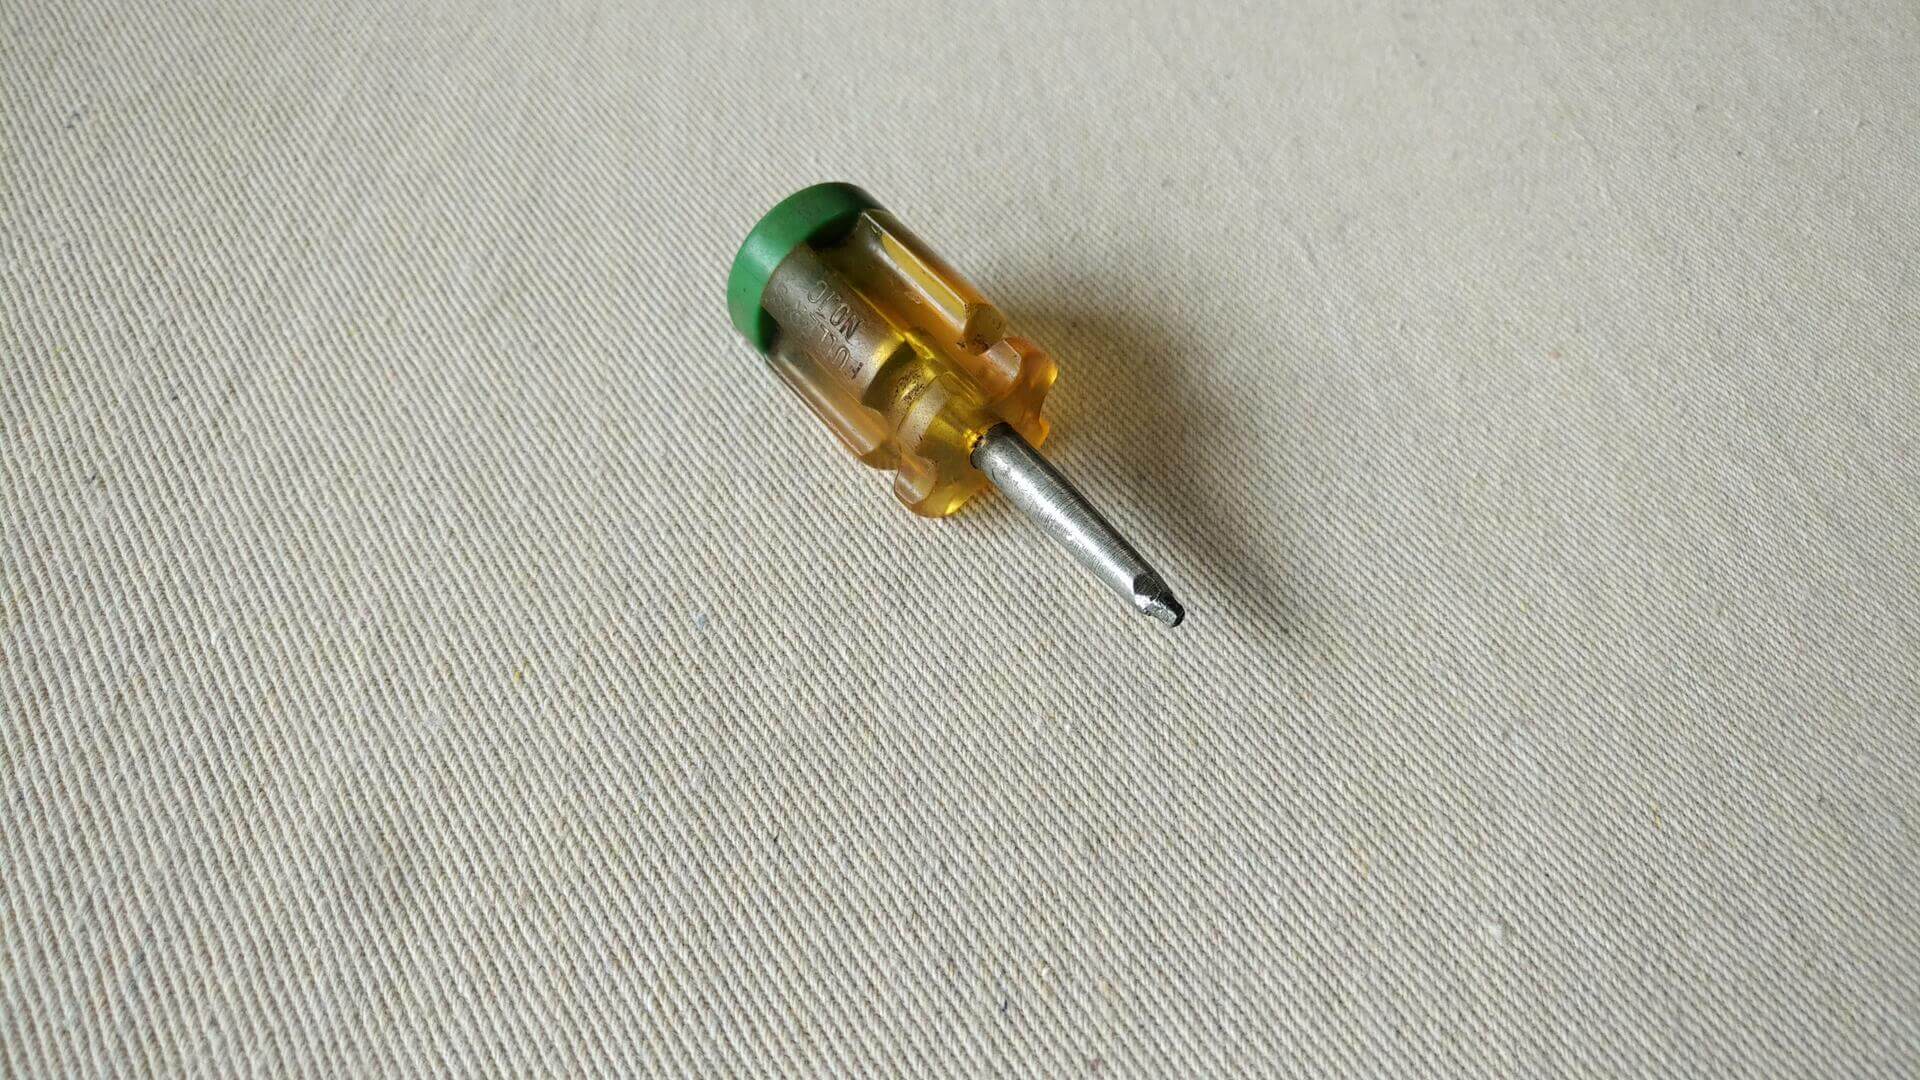 Fuller No. 10 Robertson head stubby screwdriver with yellow unbreakable handle and rubber top cap. Vintage collectible carpenter and electrician hand tools